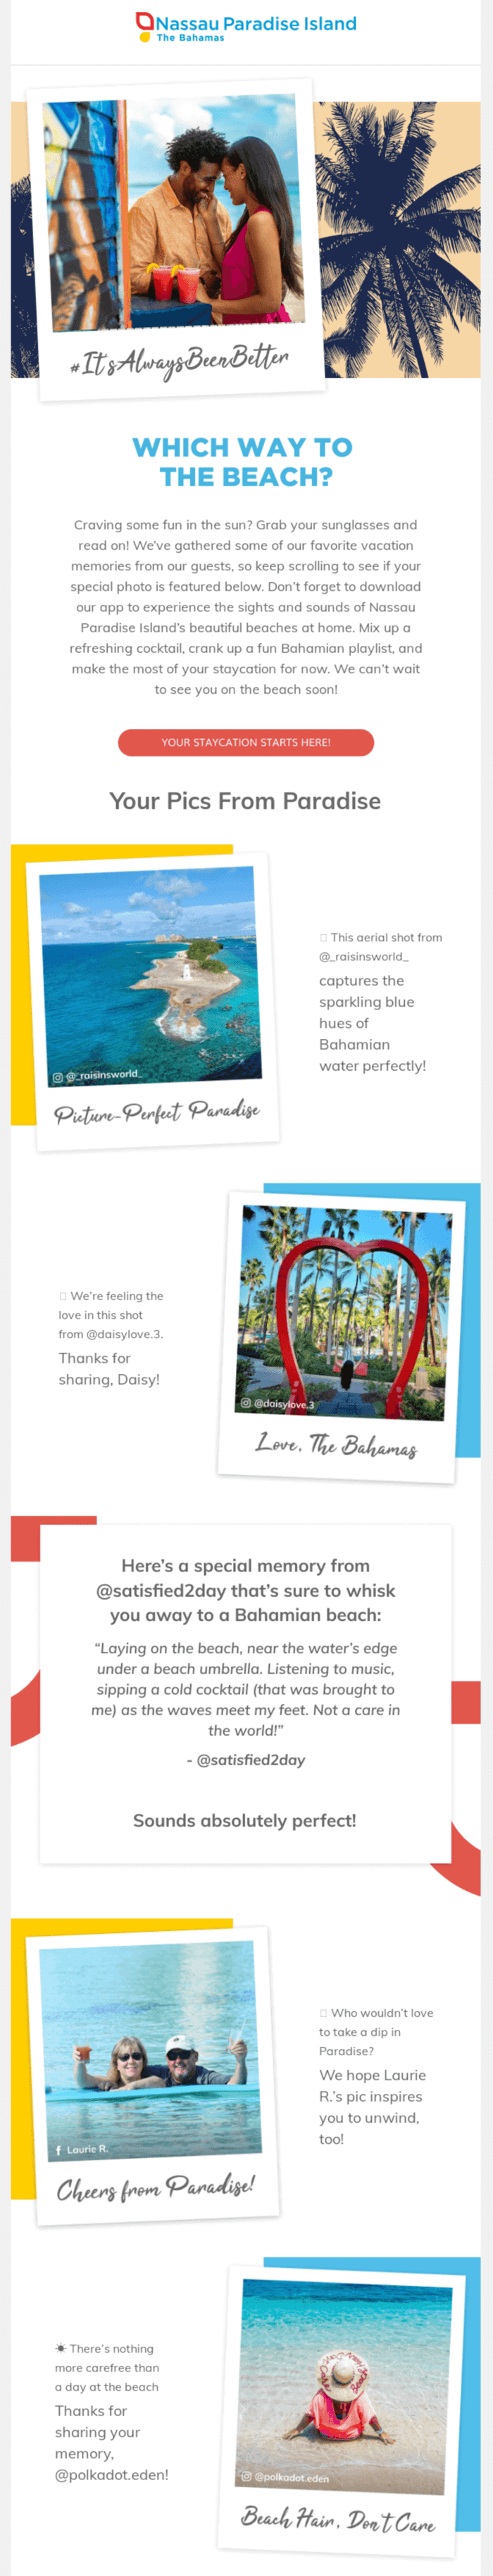 A newsletter from Nassau Paradise Island contains tagged location photos and posts of their guests.